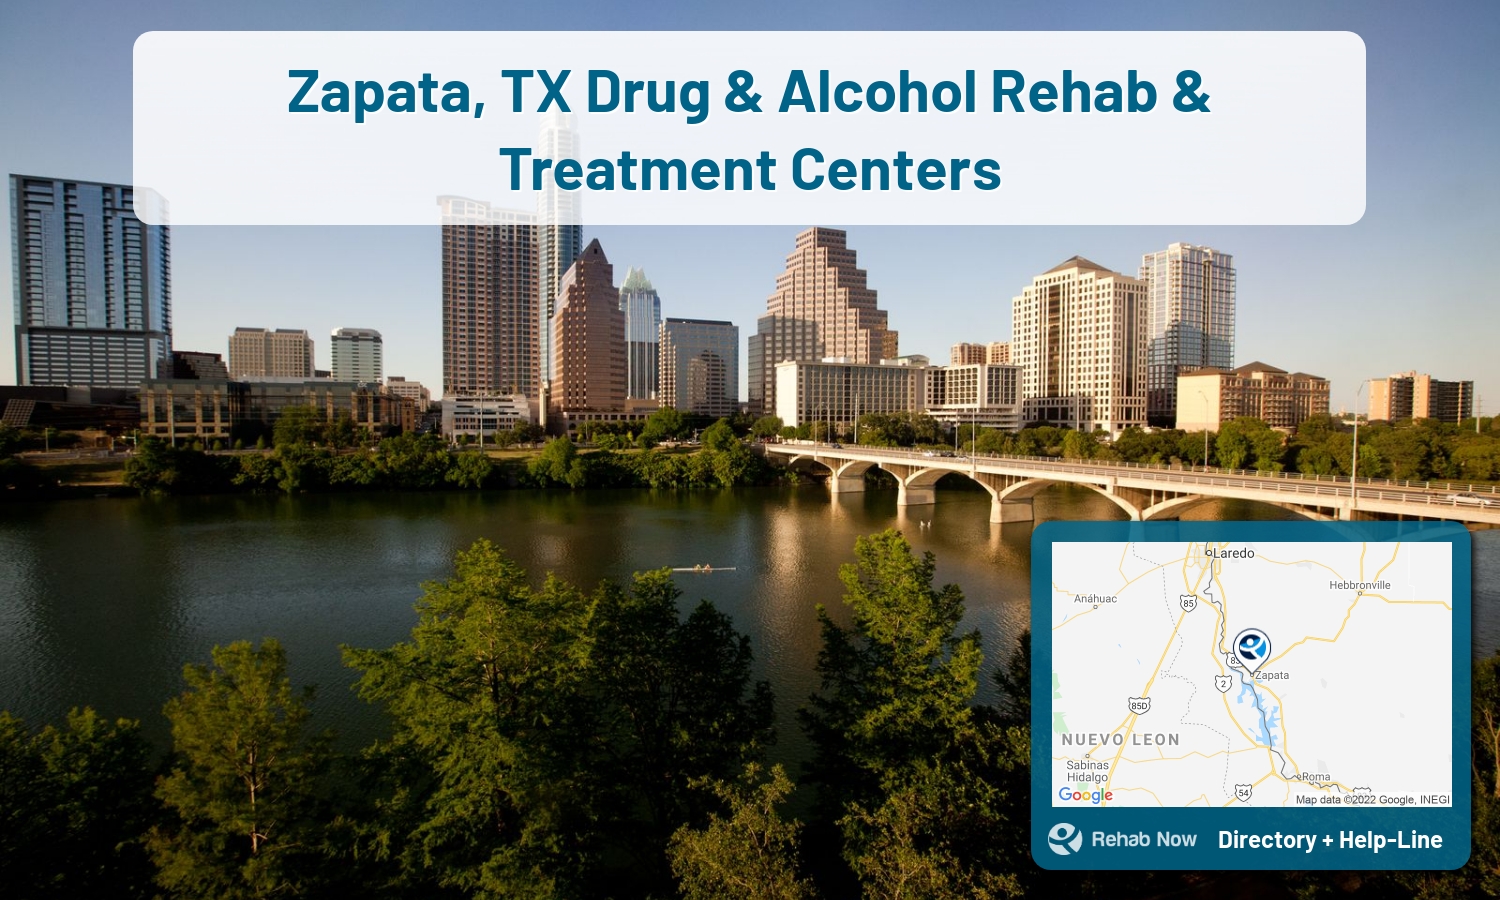 Our experts can help you find treatment now in Zapata, Texas. We list drug rehab and alcohol centers in Texas.